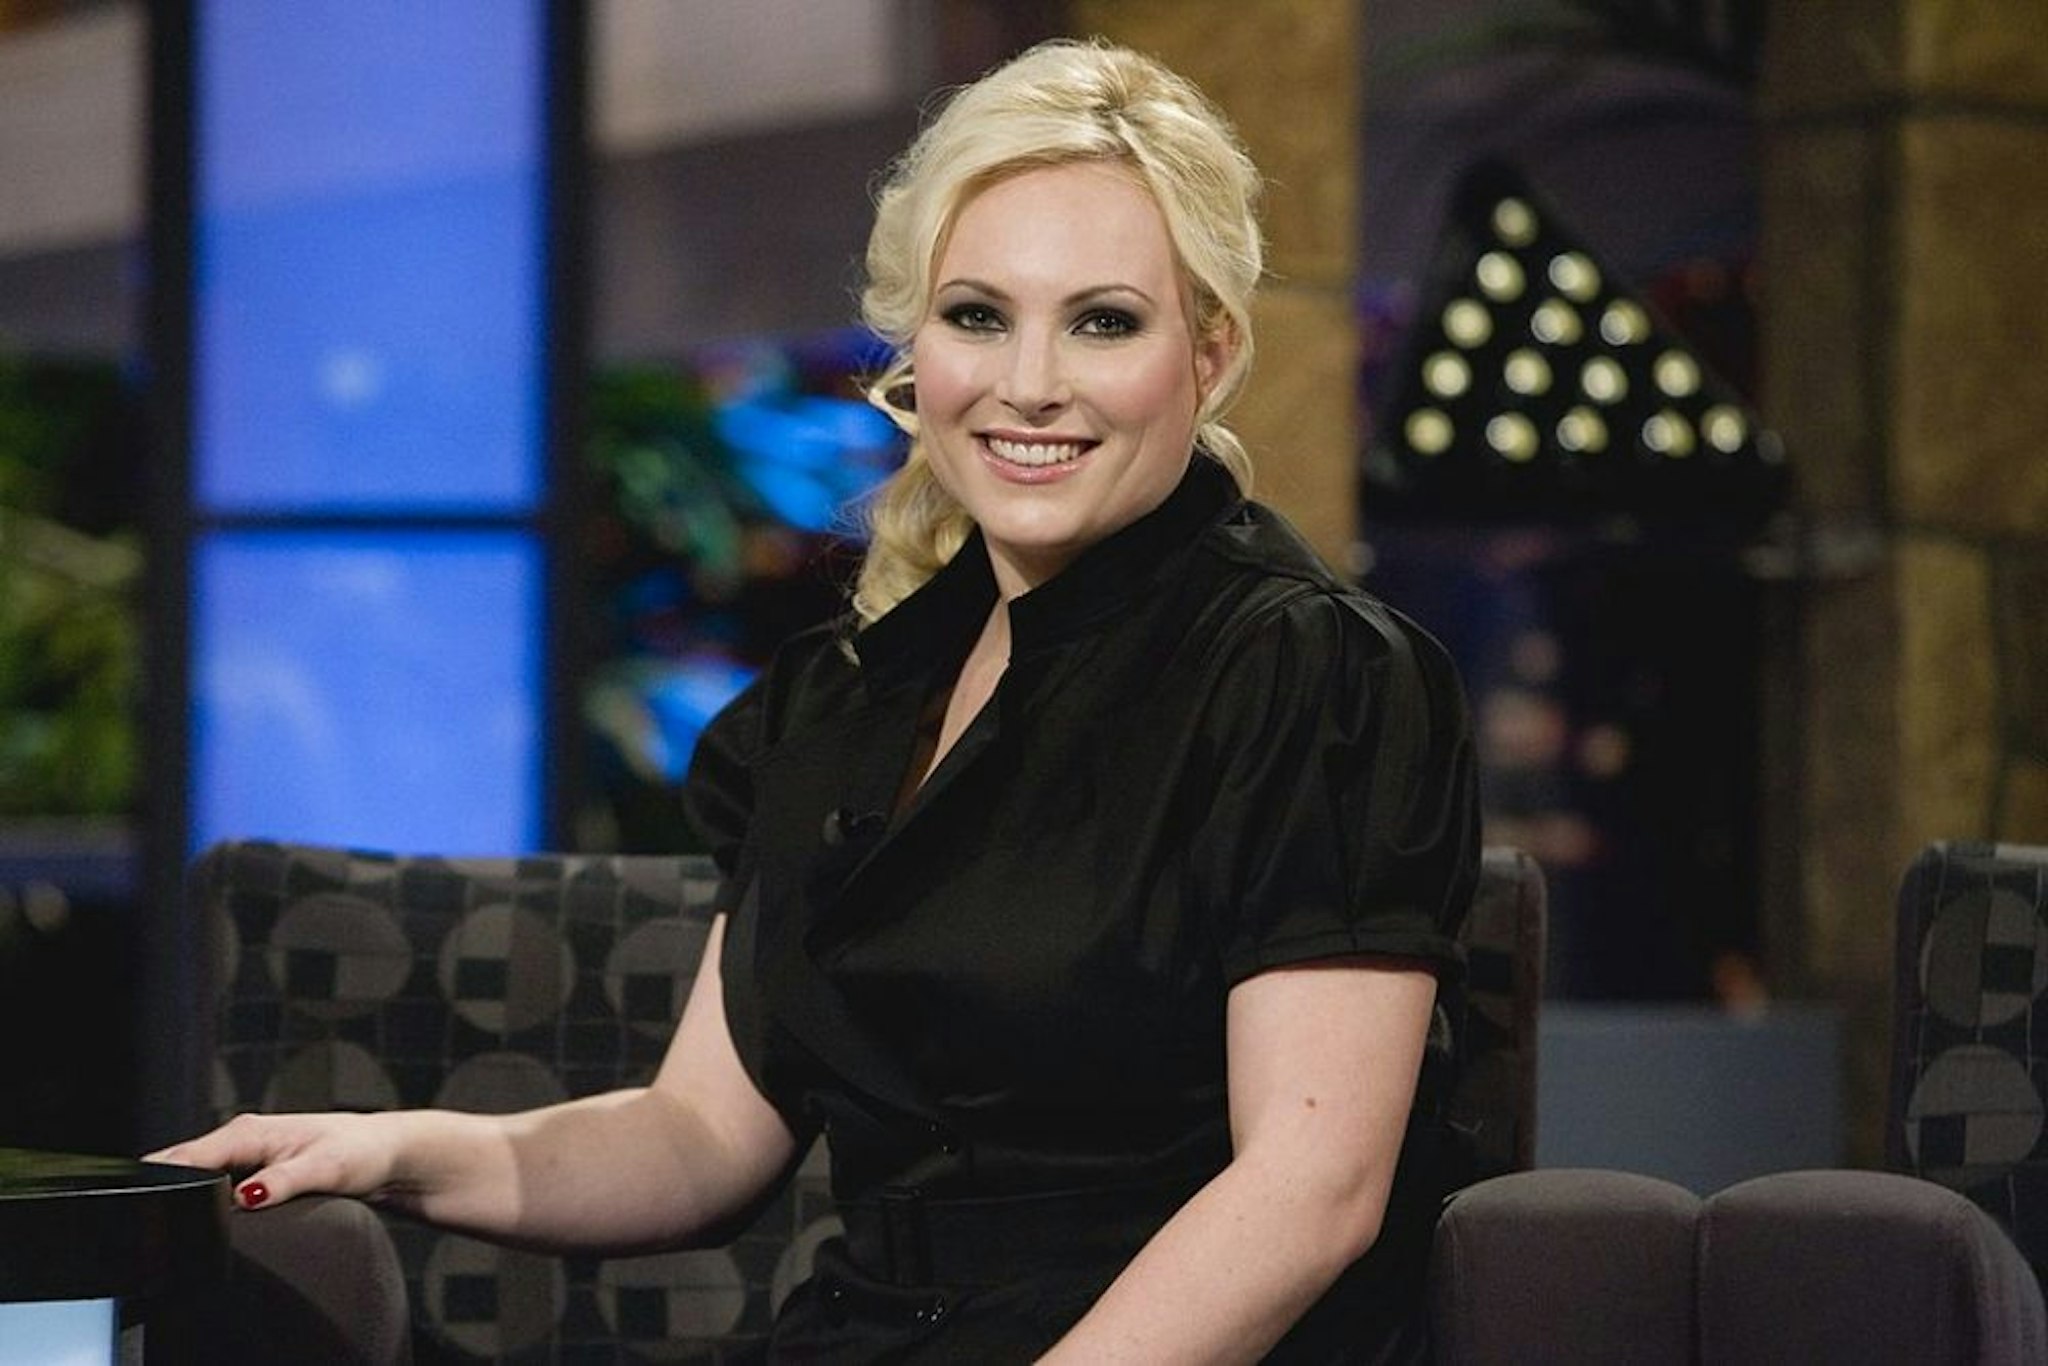 LAST CALL WITH CARSON DALY -- Meghan McCain -- Episode 922 -- Aired 09/18/2008 -- Pictured: Meghan McCain during an interview